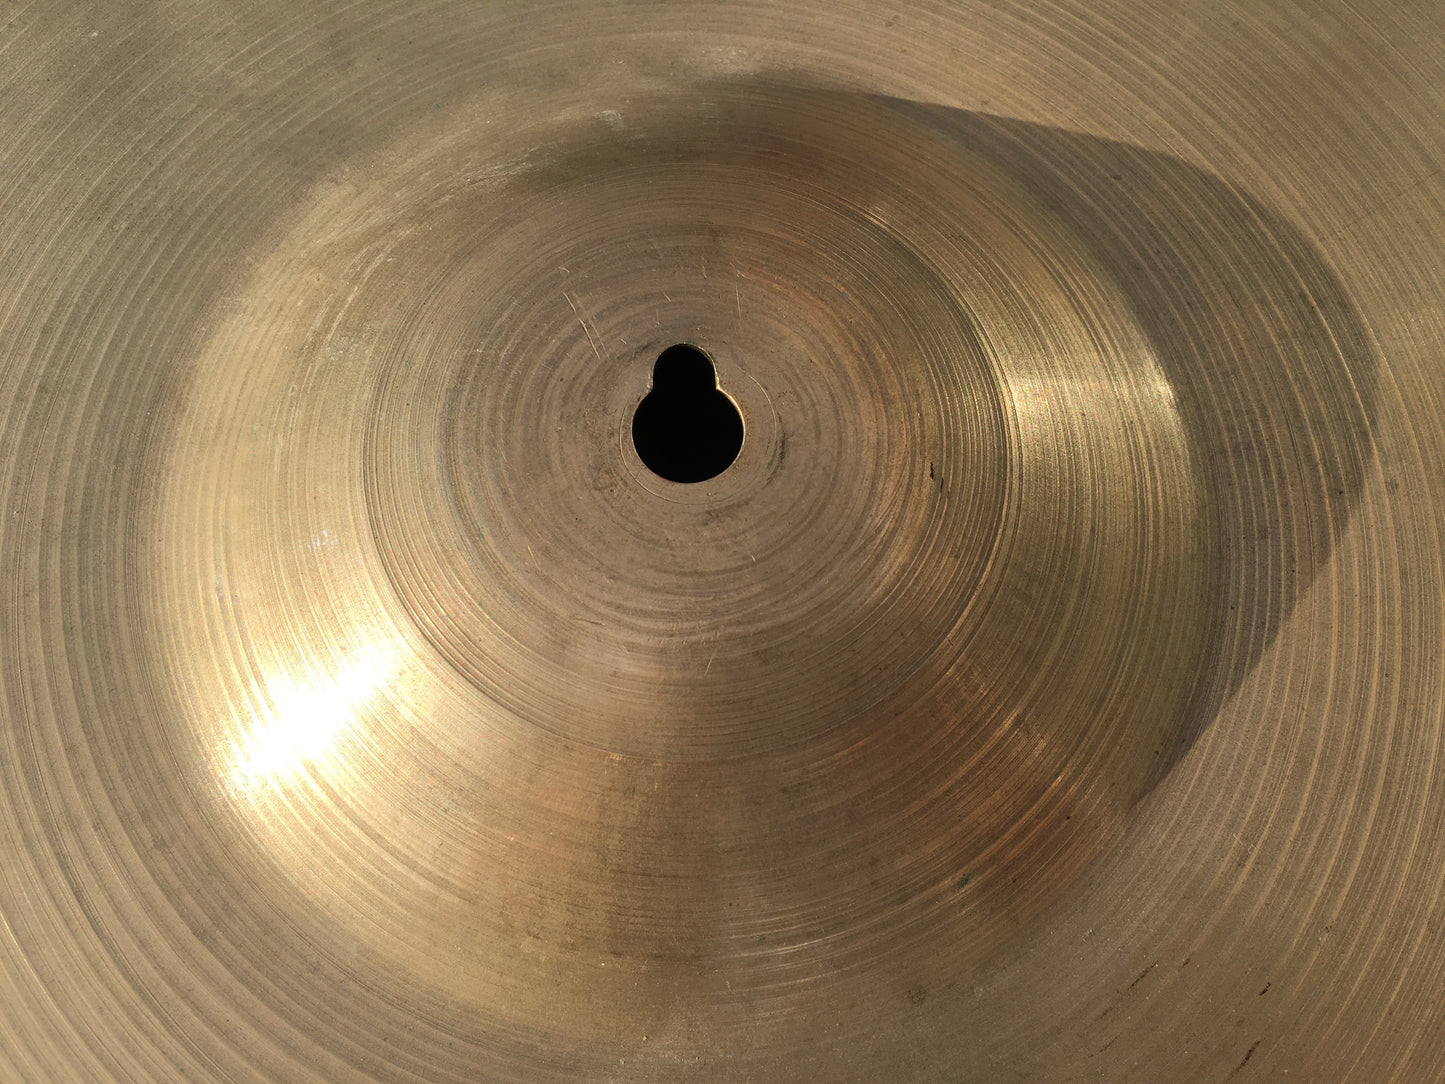 22" Zildjian A 1950's Large Hollow Block Stamp Ride Cymbal 2434g Inventory  # 323